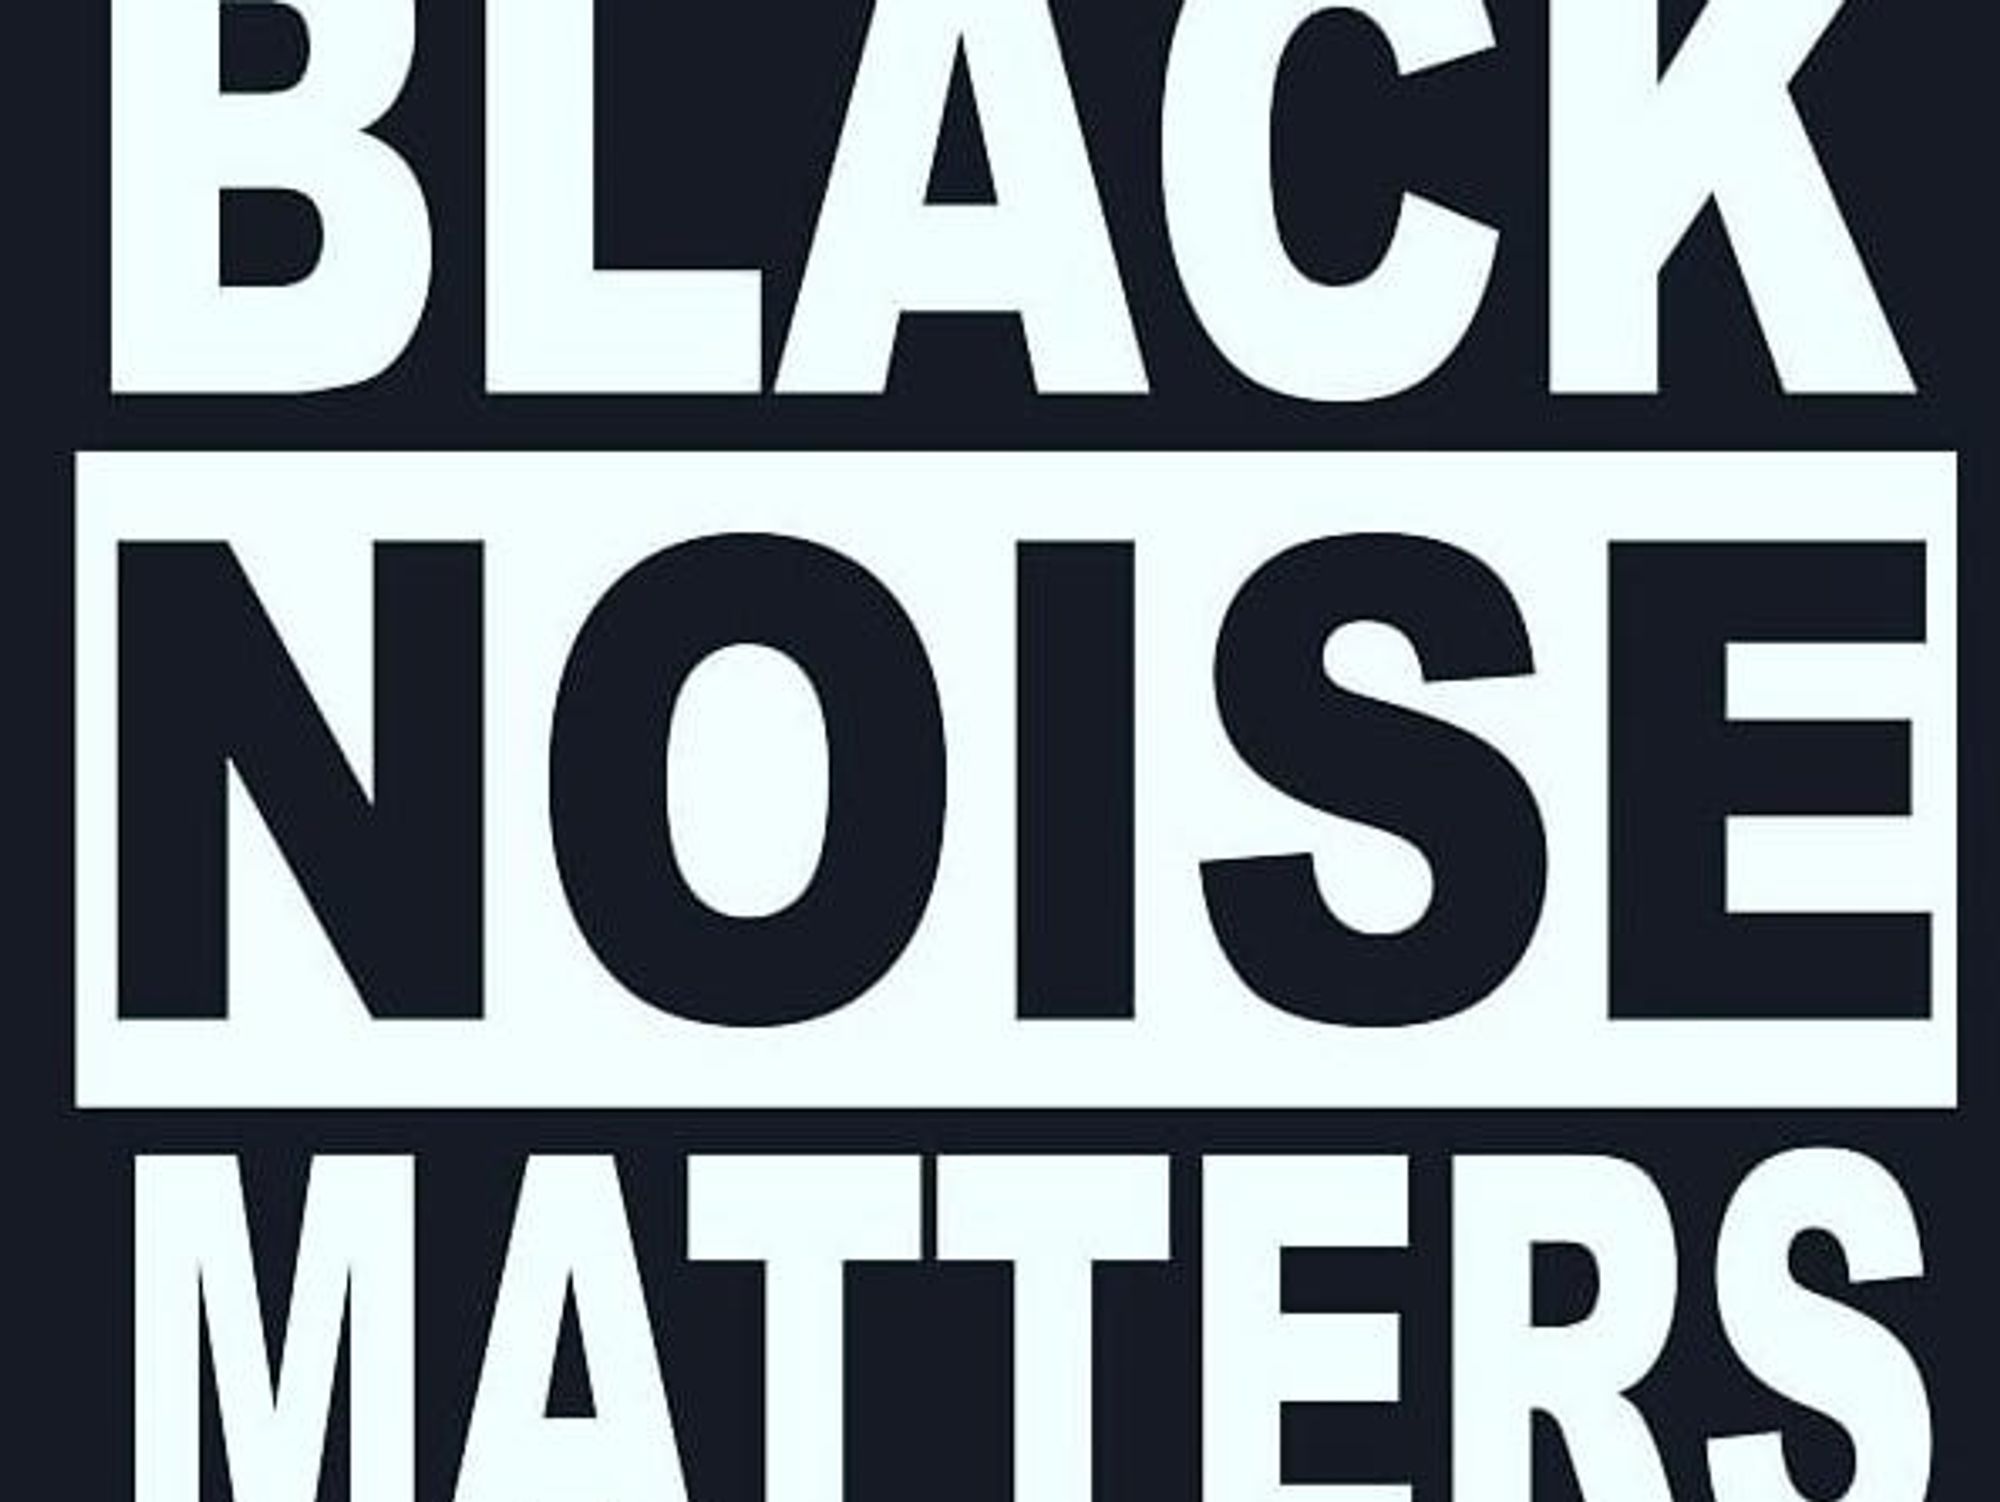 One of South Africa’s Oldest Hip-Hop Crews Black Noise Releases a New Project ‘Black Noise Matters’